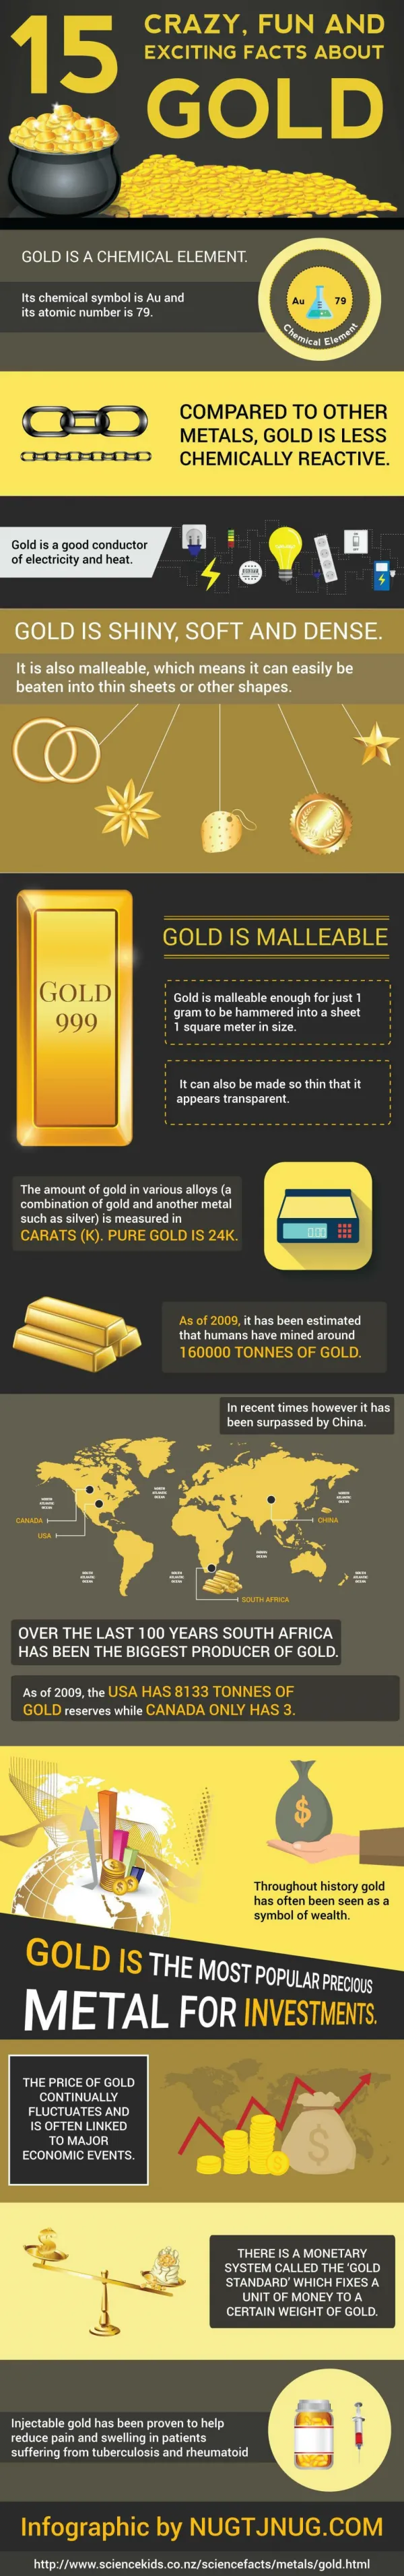 15 Crazy Facts About Gold